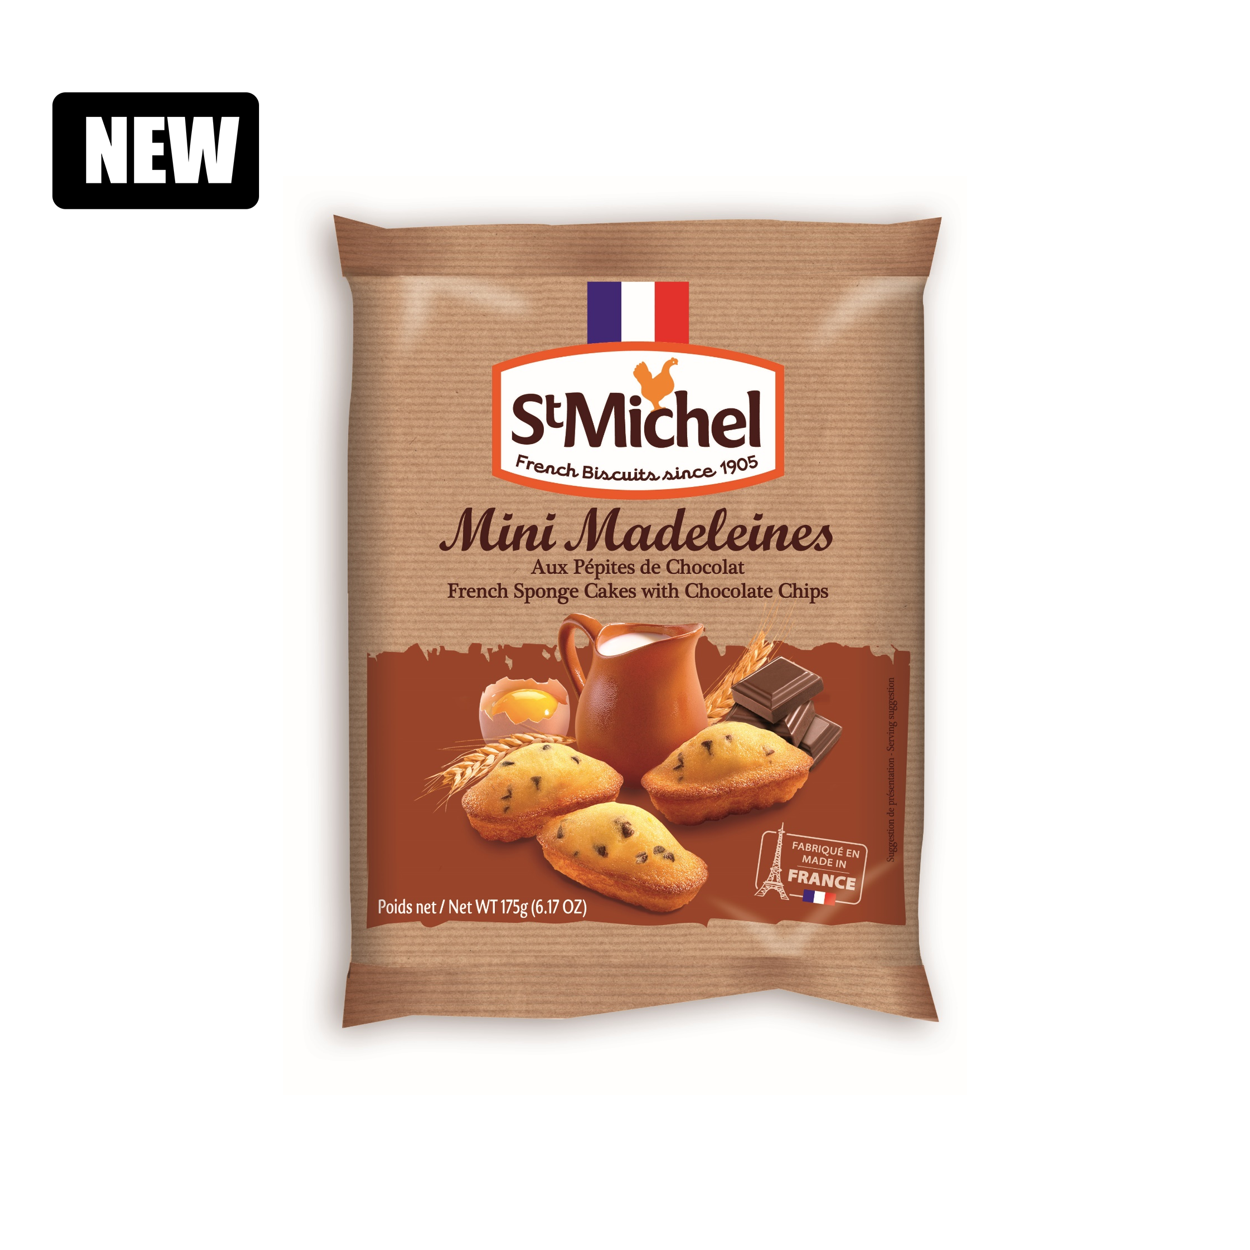 St. Michel mini madeleines with chocolate chips